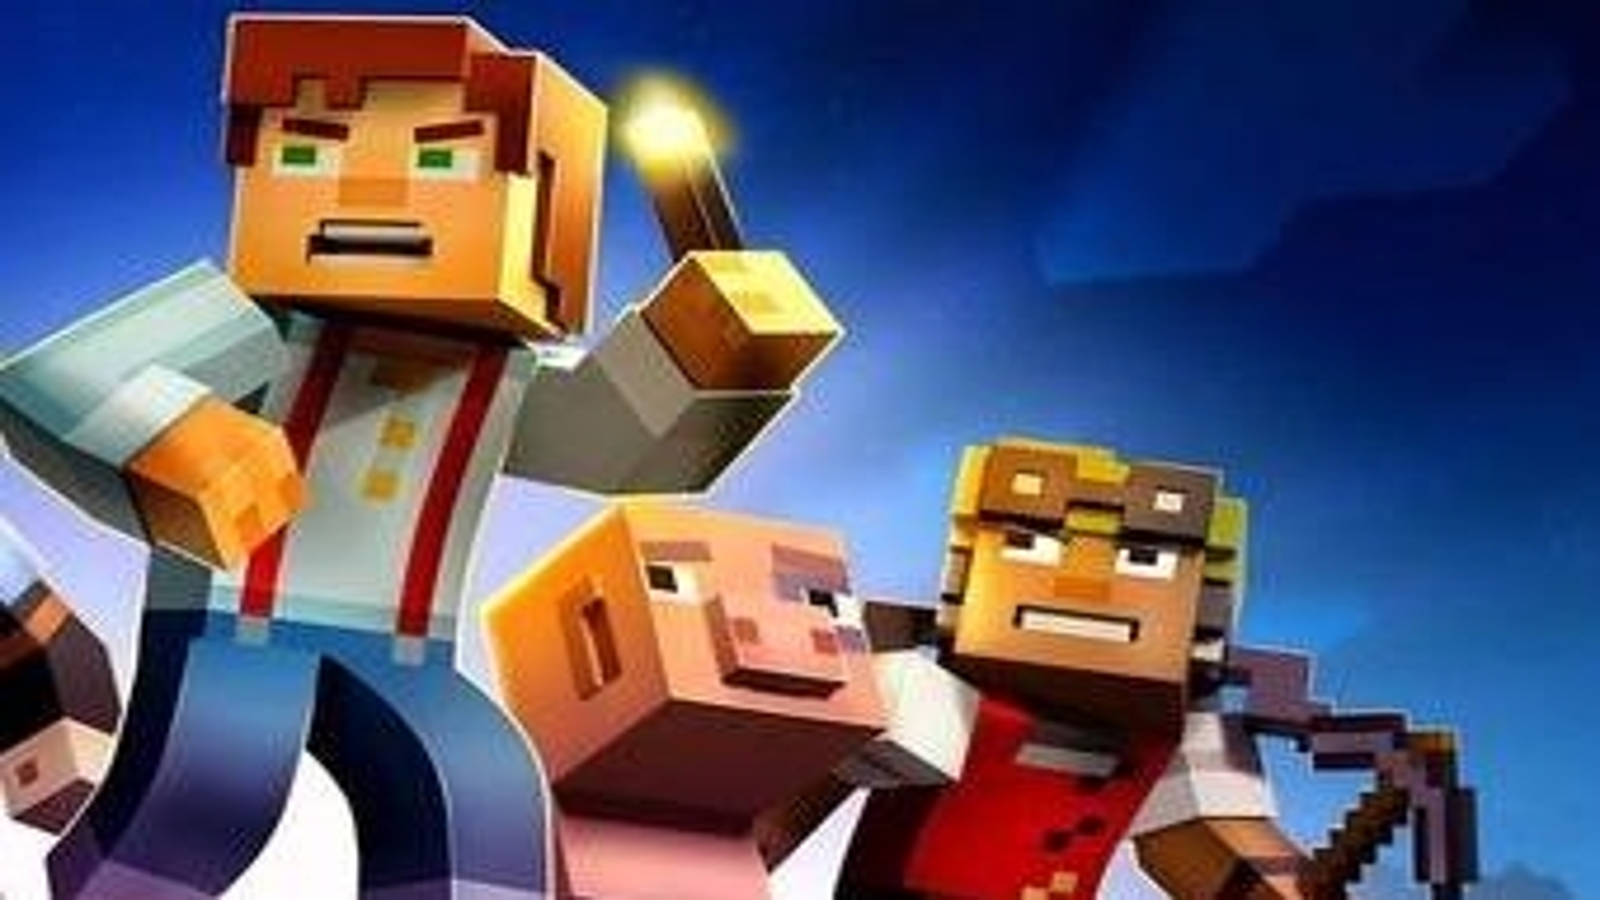 Looks like Minecraft: Story Mode will get a second season